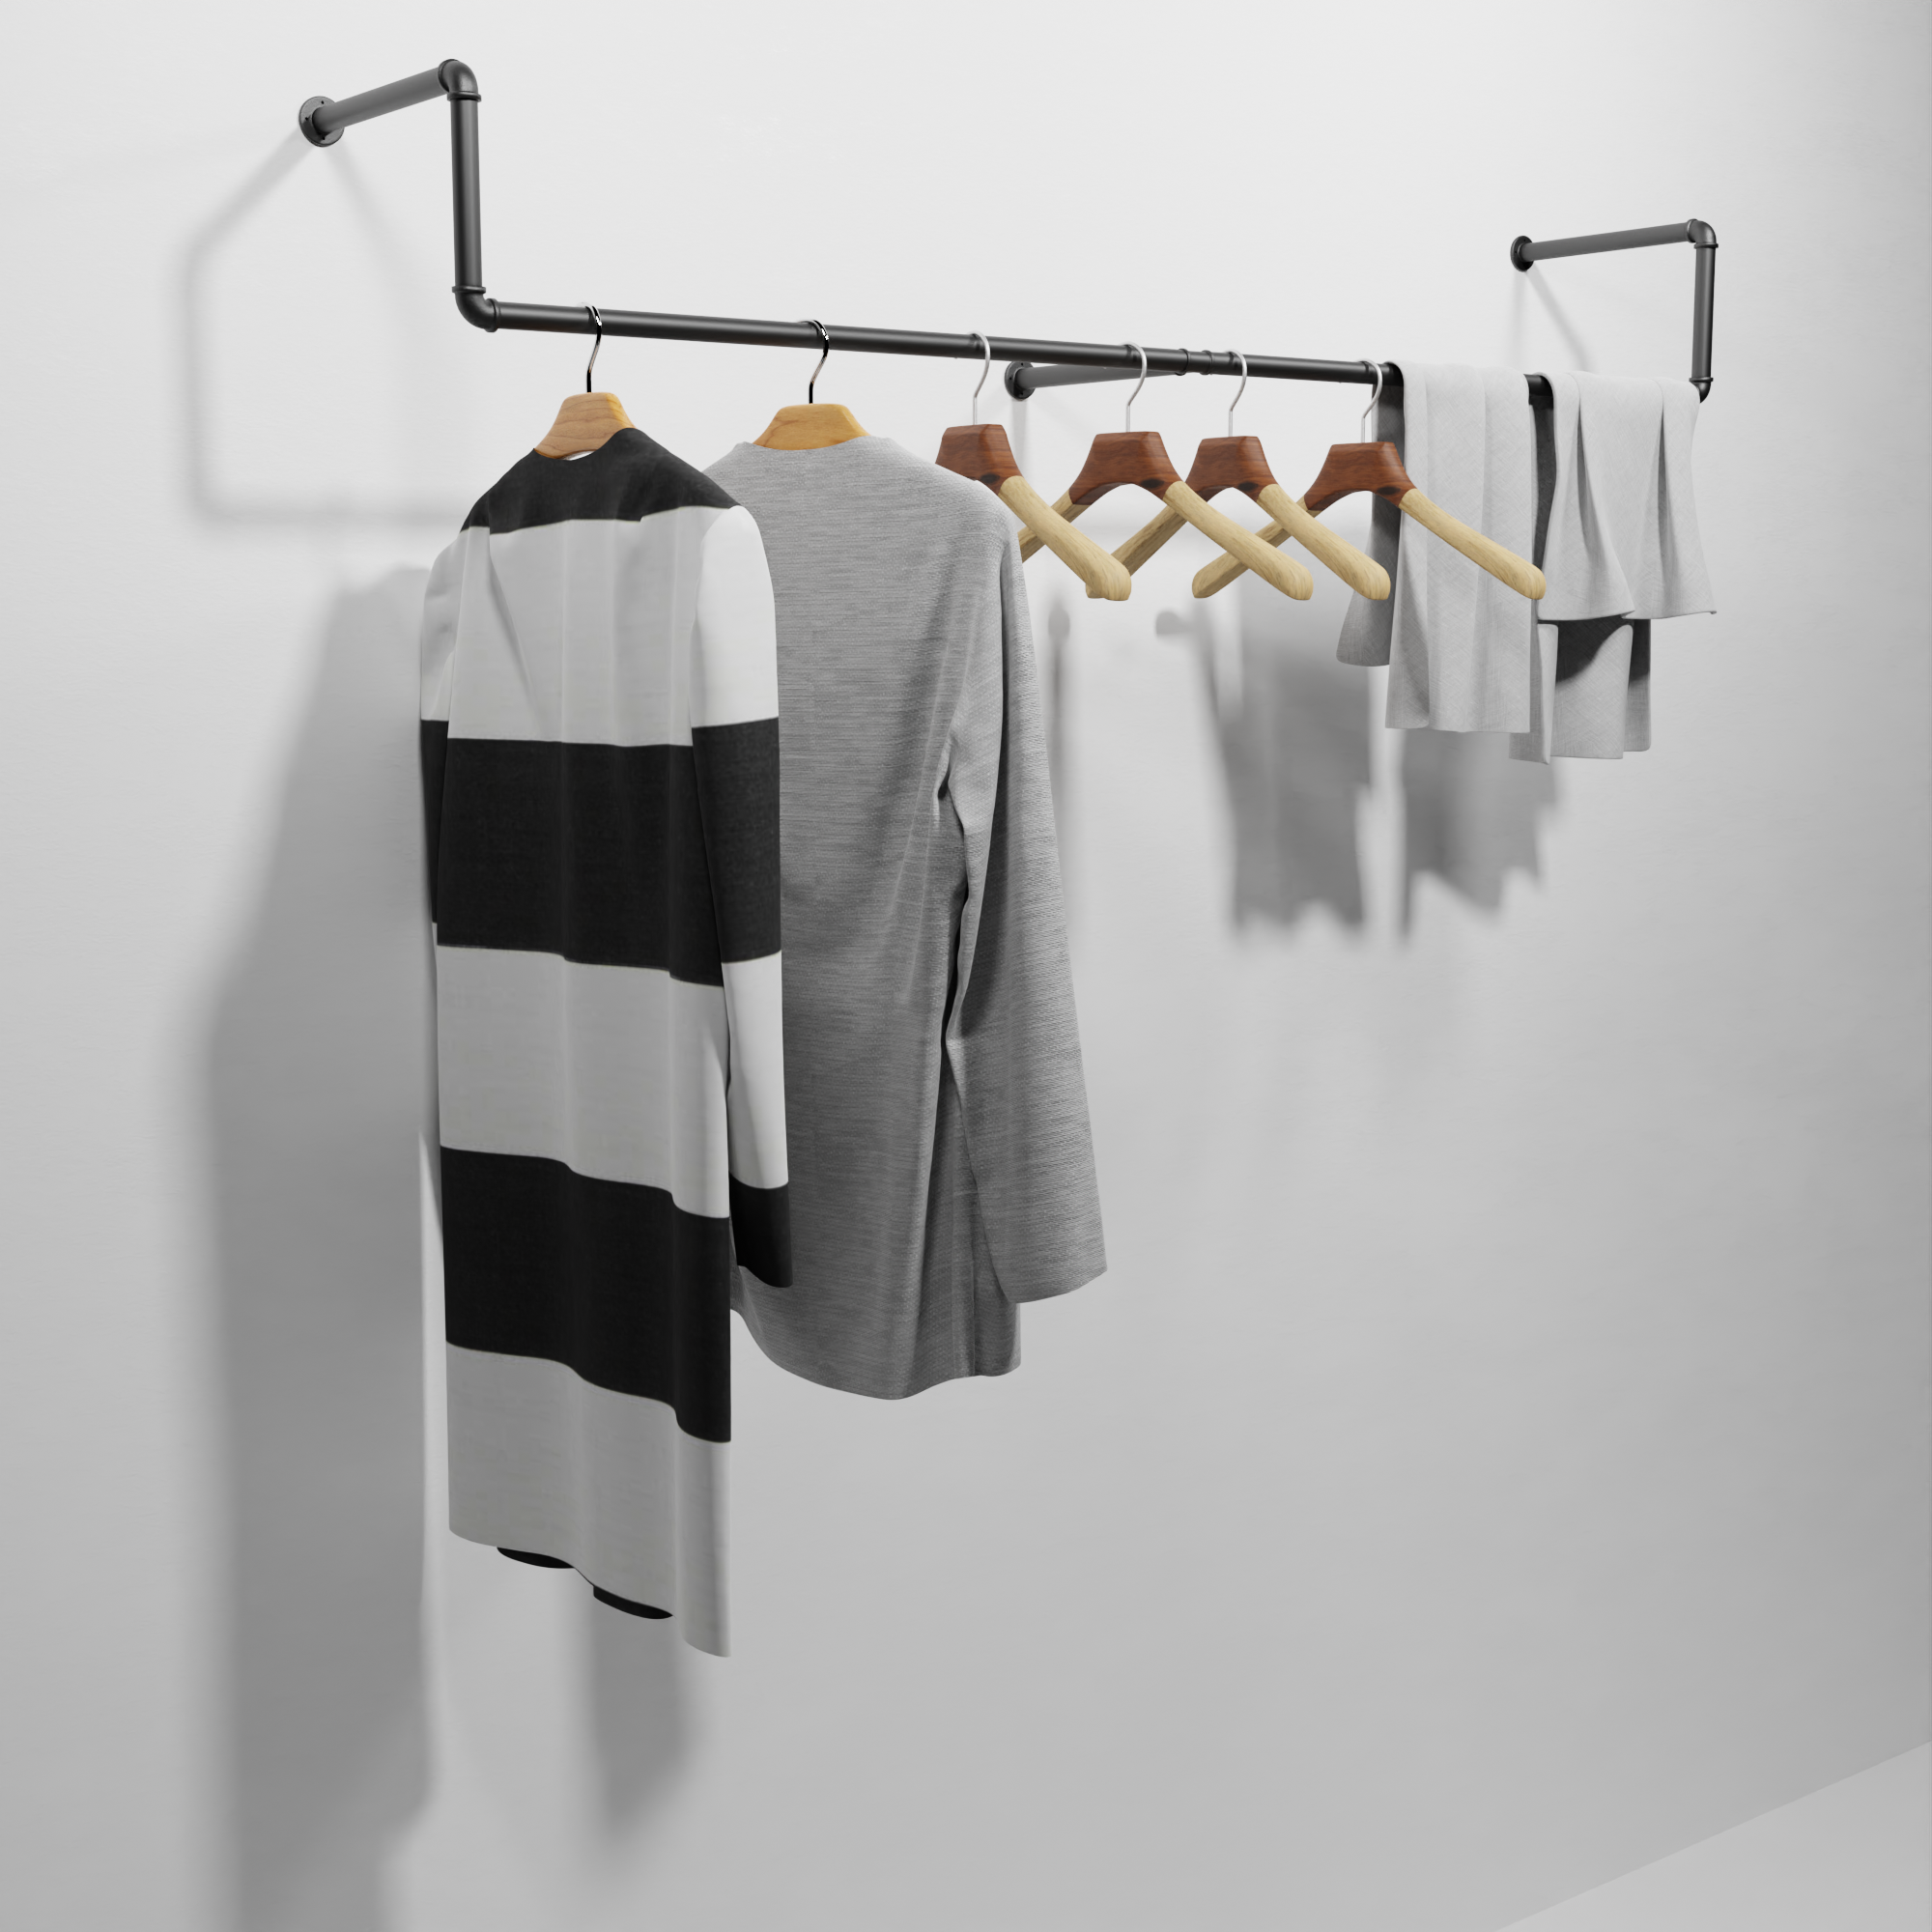 Pipe Clothing Rack - [59in - Black] Industrial Pipe Clothing Rack, Wall Mounted Clothes Rack